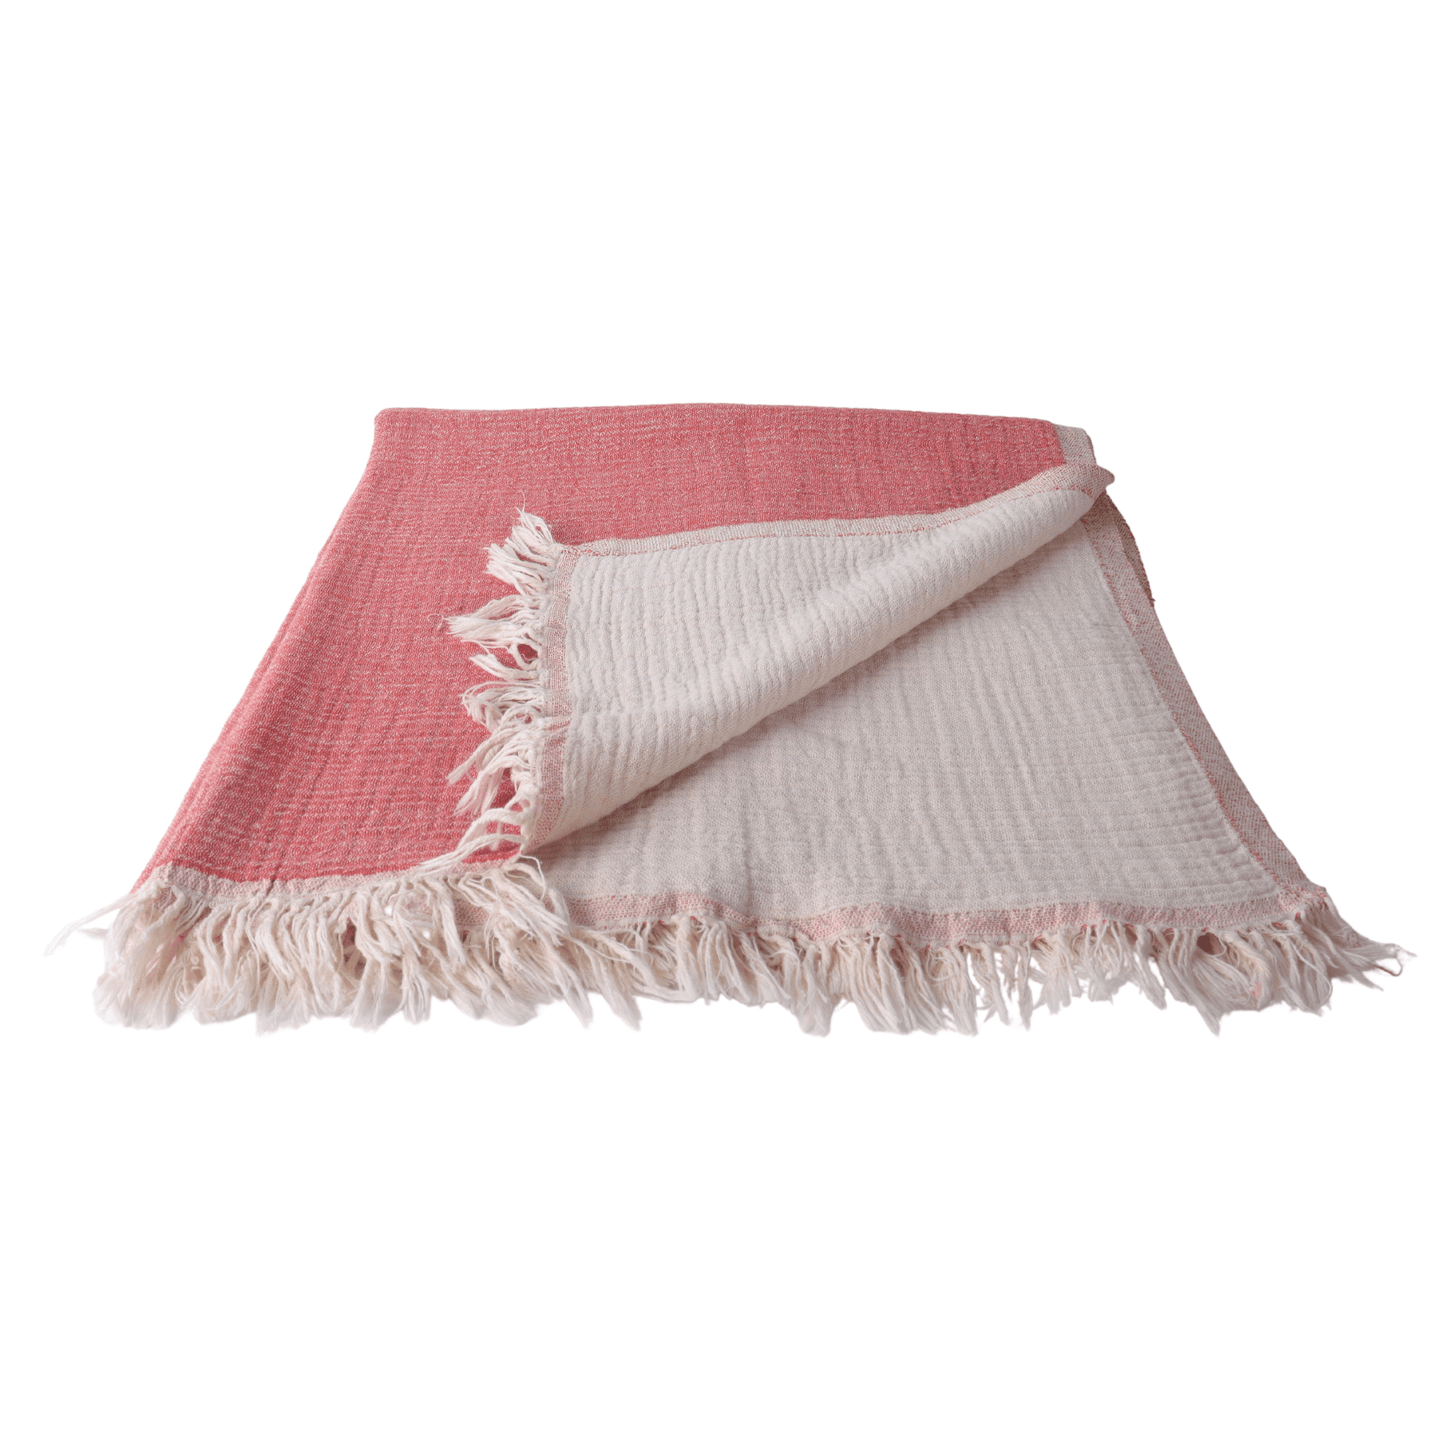 Muslin Towels for Adults rose 4